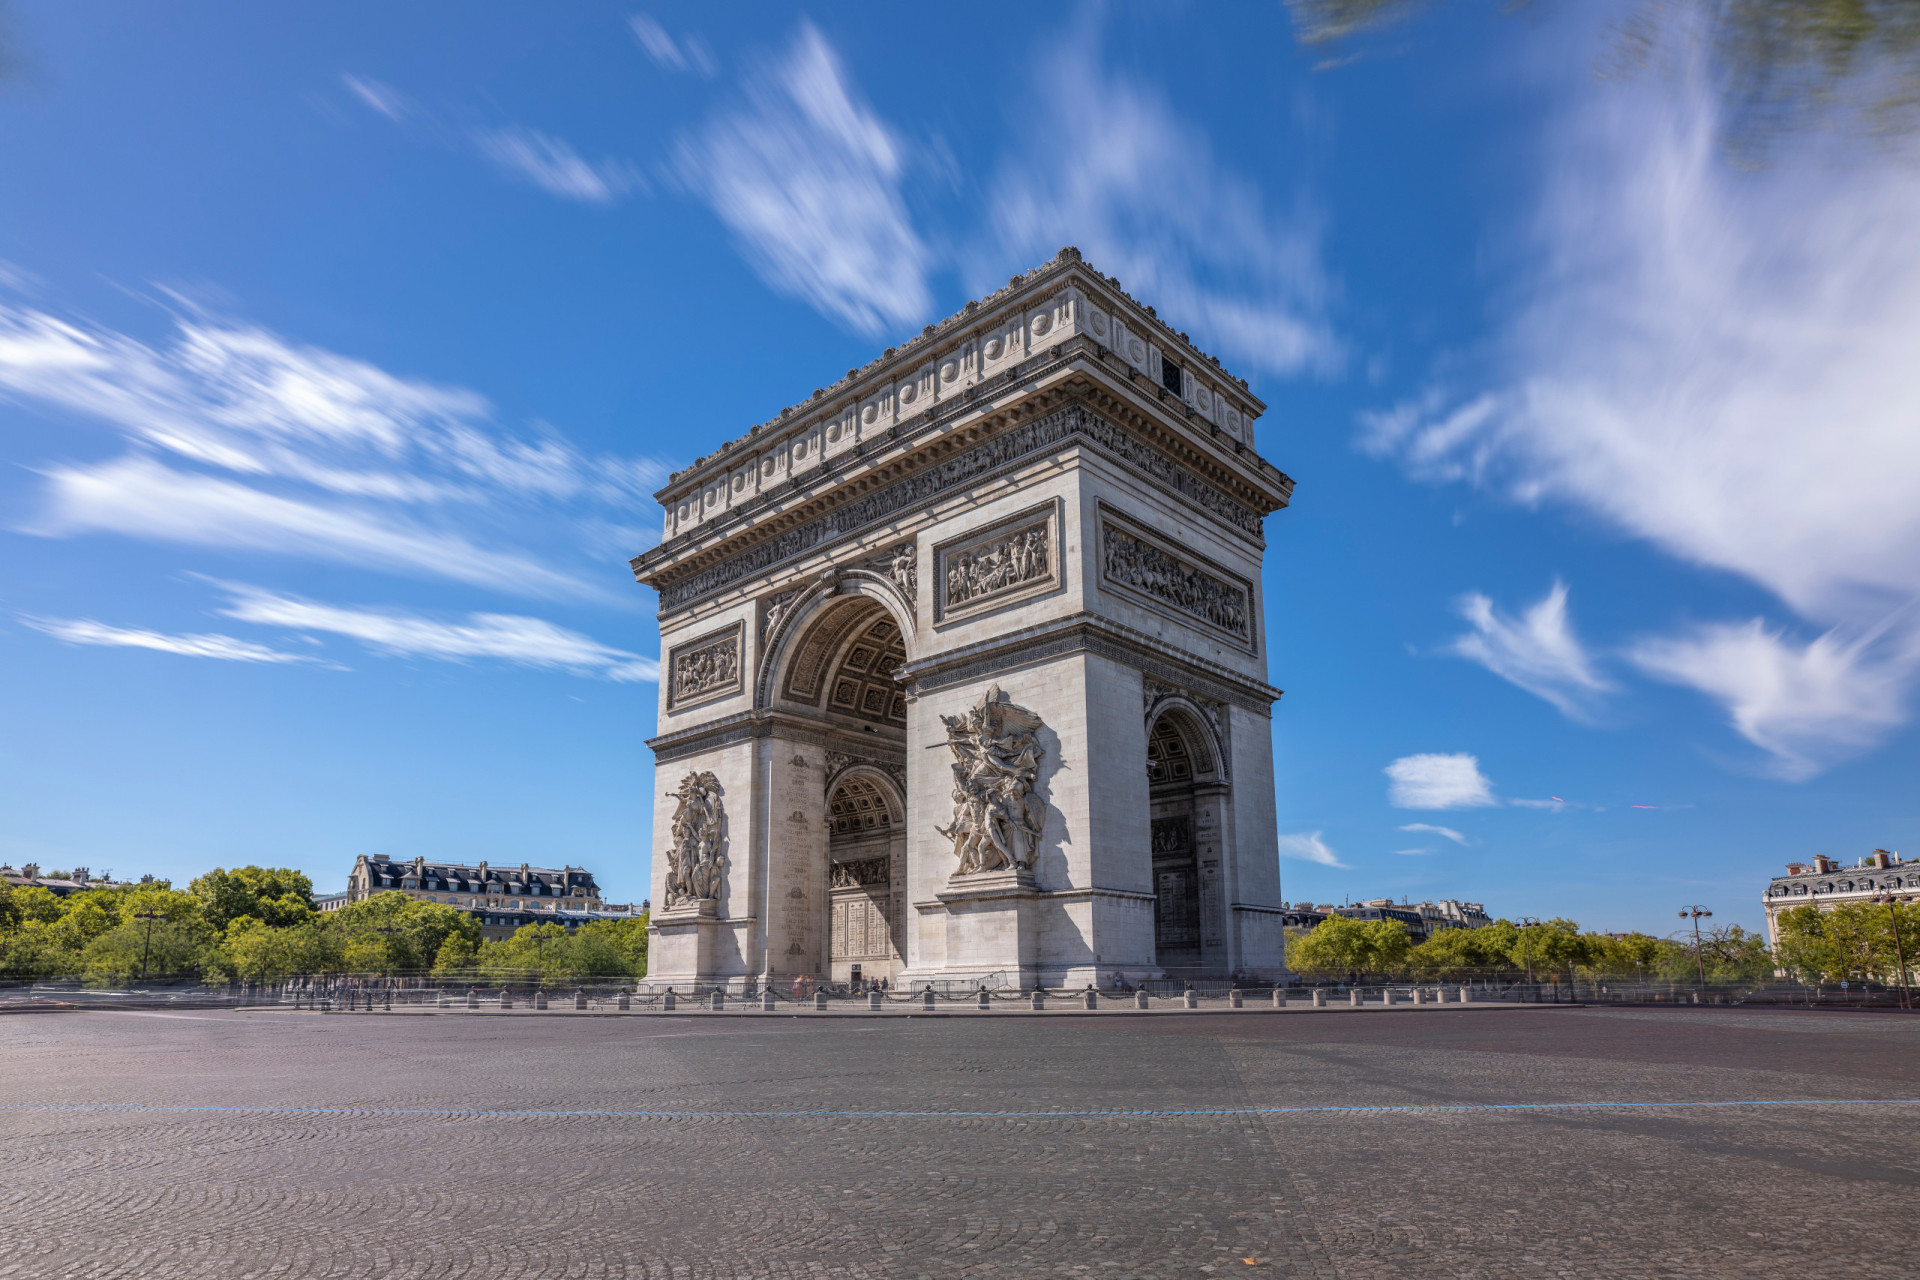 <p><span>The Arc de Triomphe is another Parisian attraction with </span><span>a high number of</span><span> pickpockets around it. Take care of your belongings near this area.</span></p><p>You may also like:<a href="https://www.starsinsider.com/n/333551?utm_source=msn.com&utm_medium=display&utm_campaign=referral_description&utm_content=717448en-us"> The most iconic movie hairstyles</a></p>